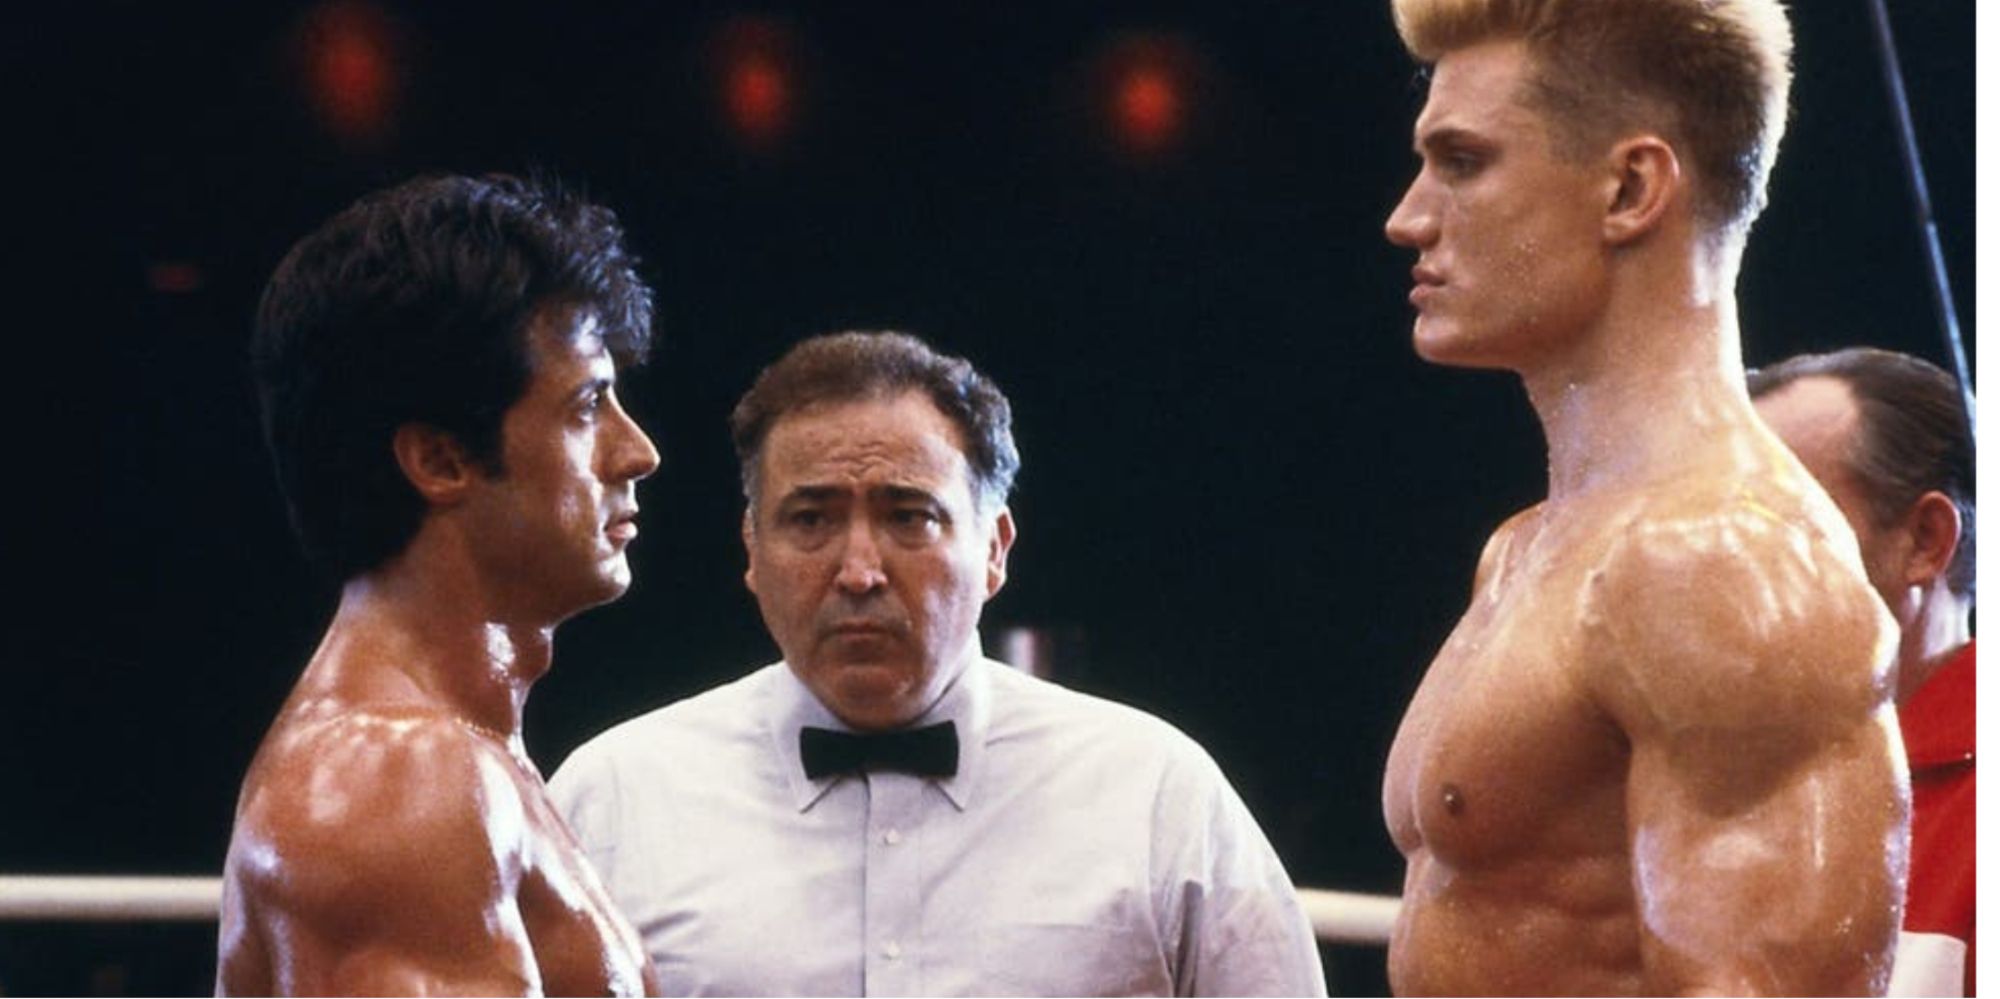 Sylvester Stallone and Dolph Lundgren in the ring about to fight 